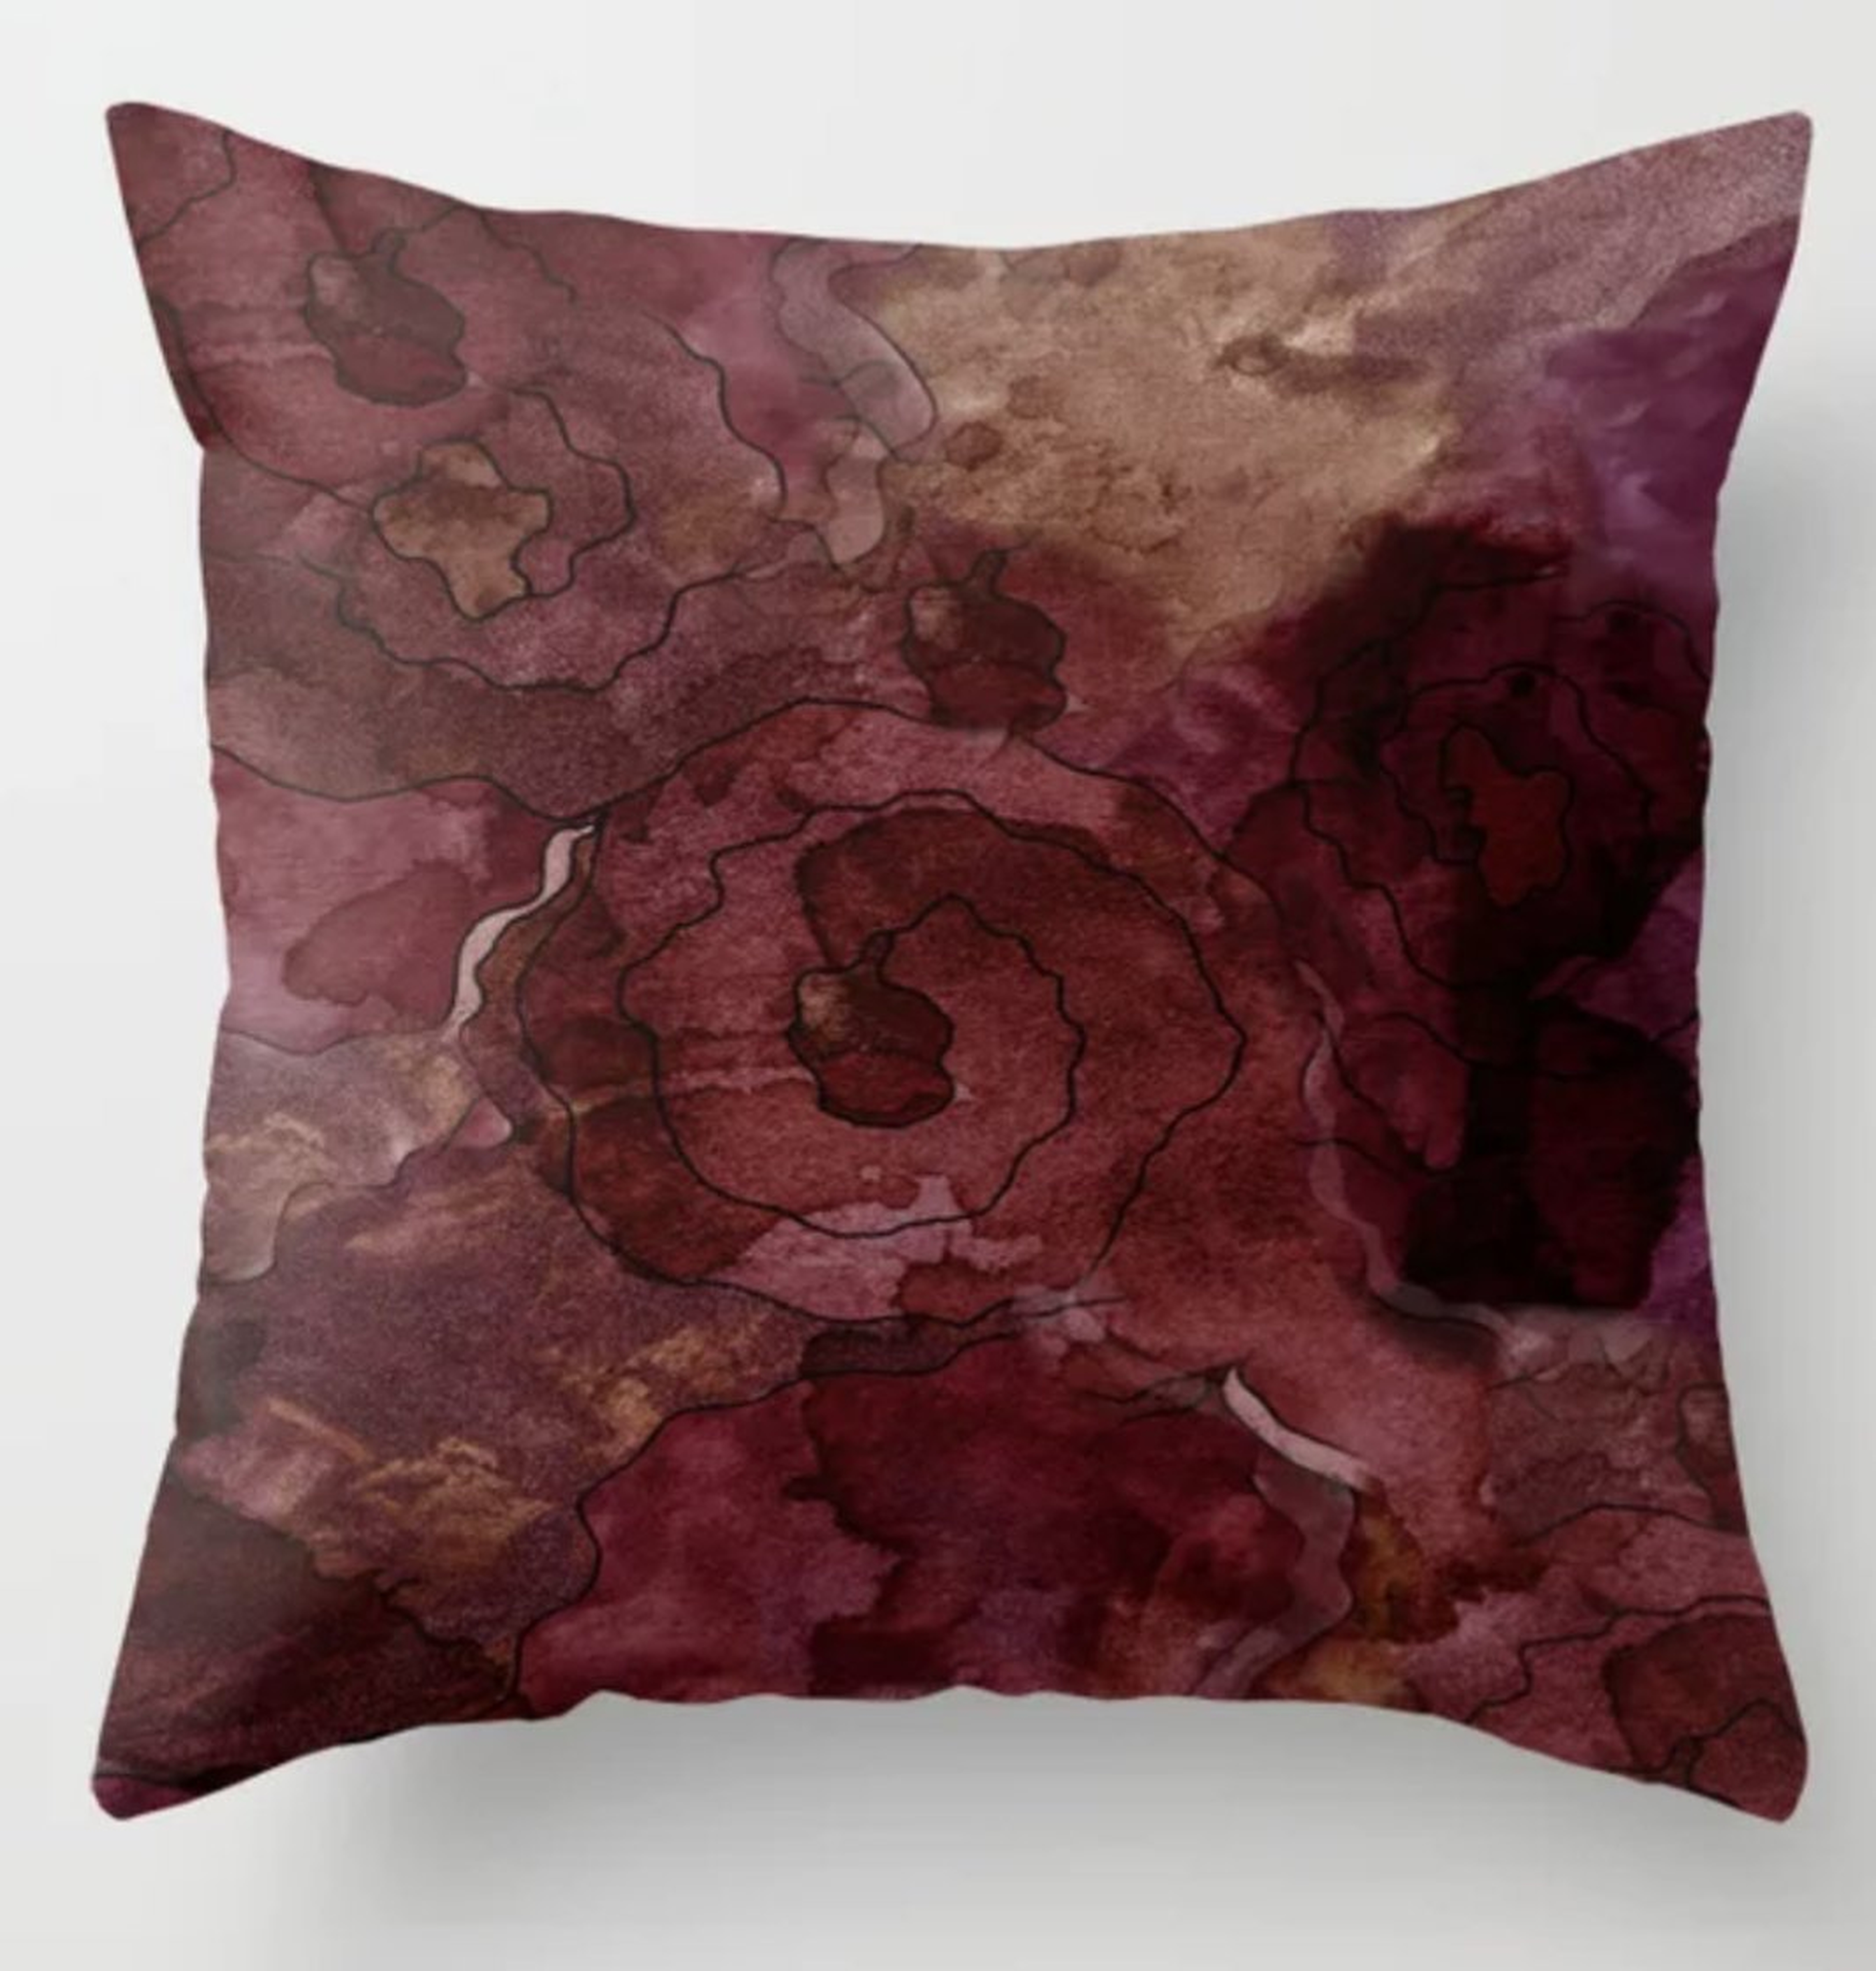 Rose, Burgundy and Merlot Watercolor Flowers Throw Pillow - Society6